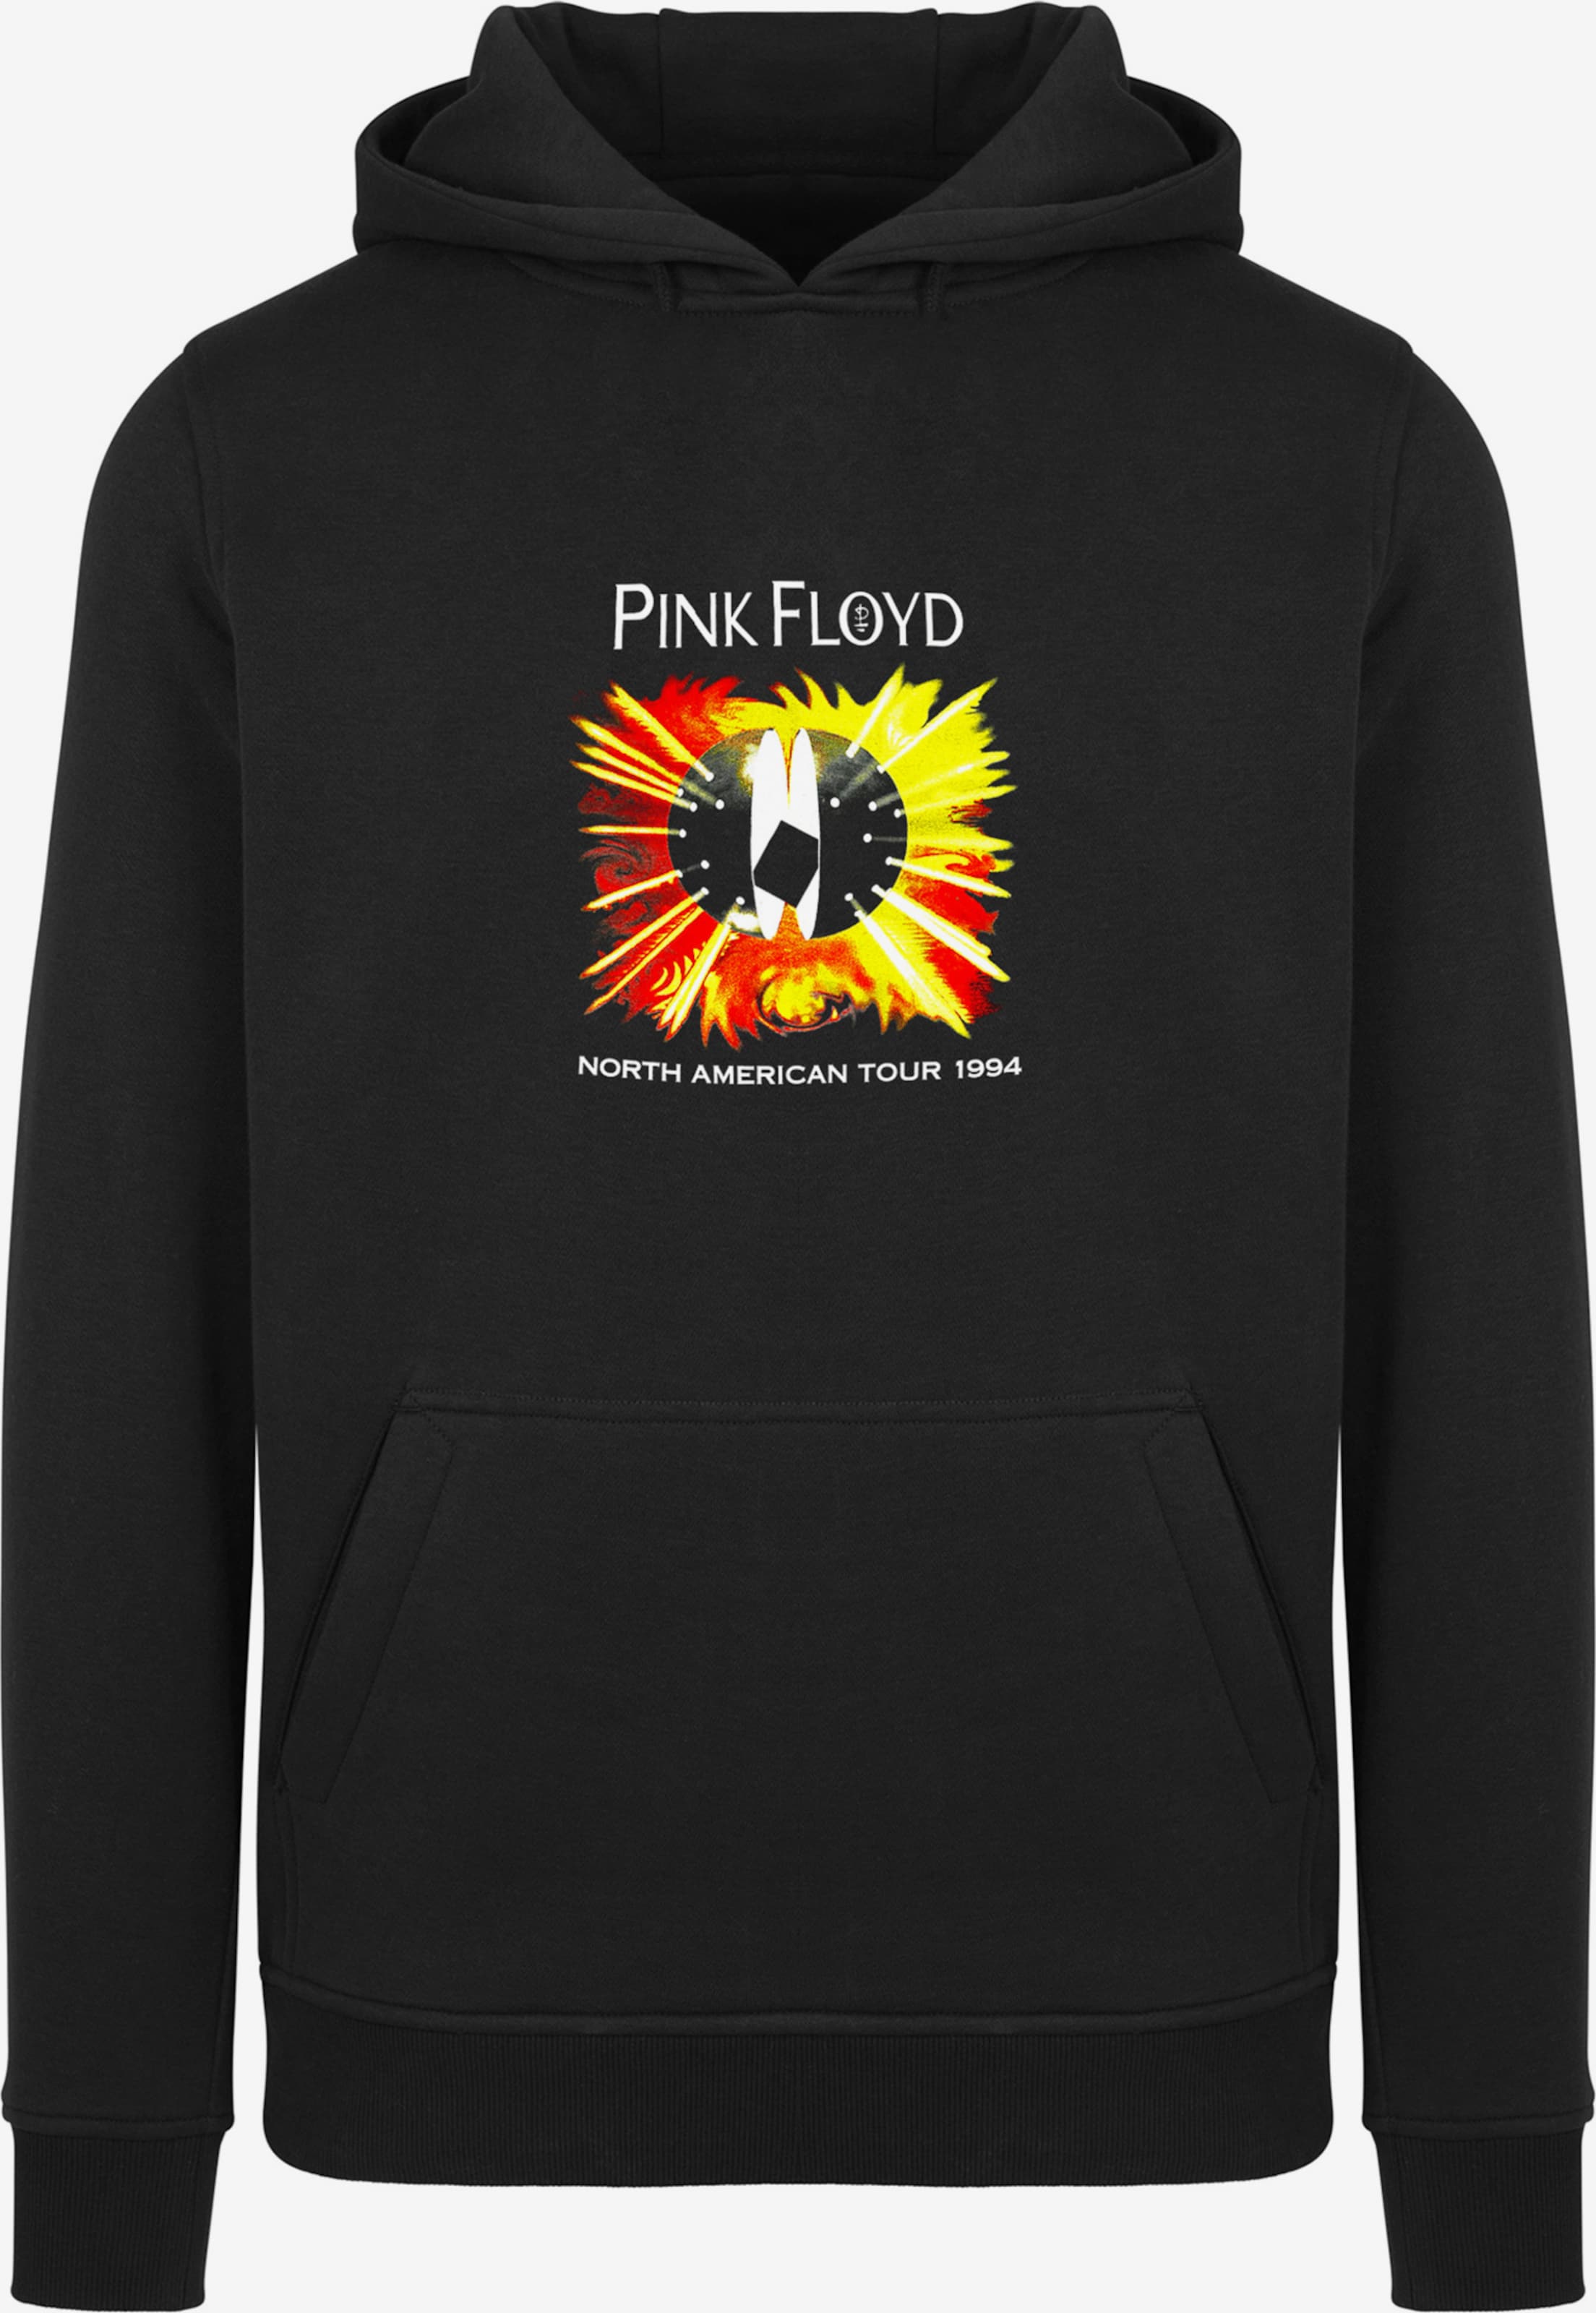 in 1994\' Tour YOU Black | Sweatshirt Floyd \'Pink American ABOUT F4NT4STIC North